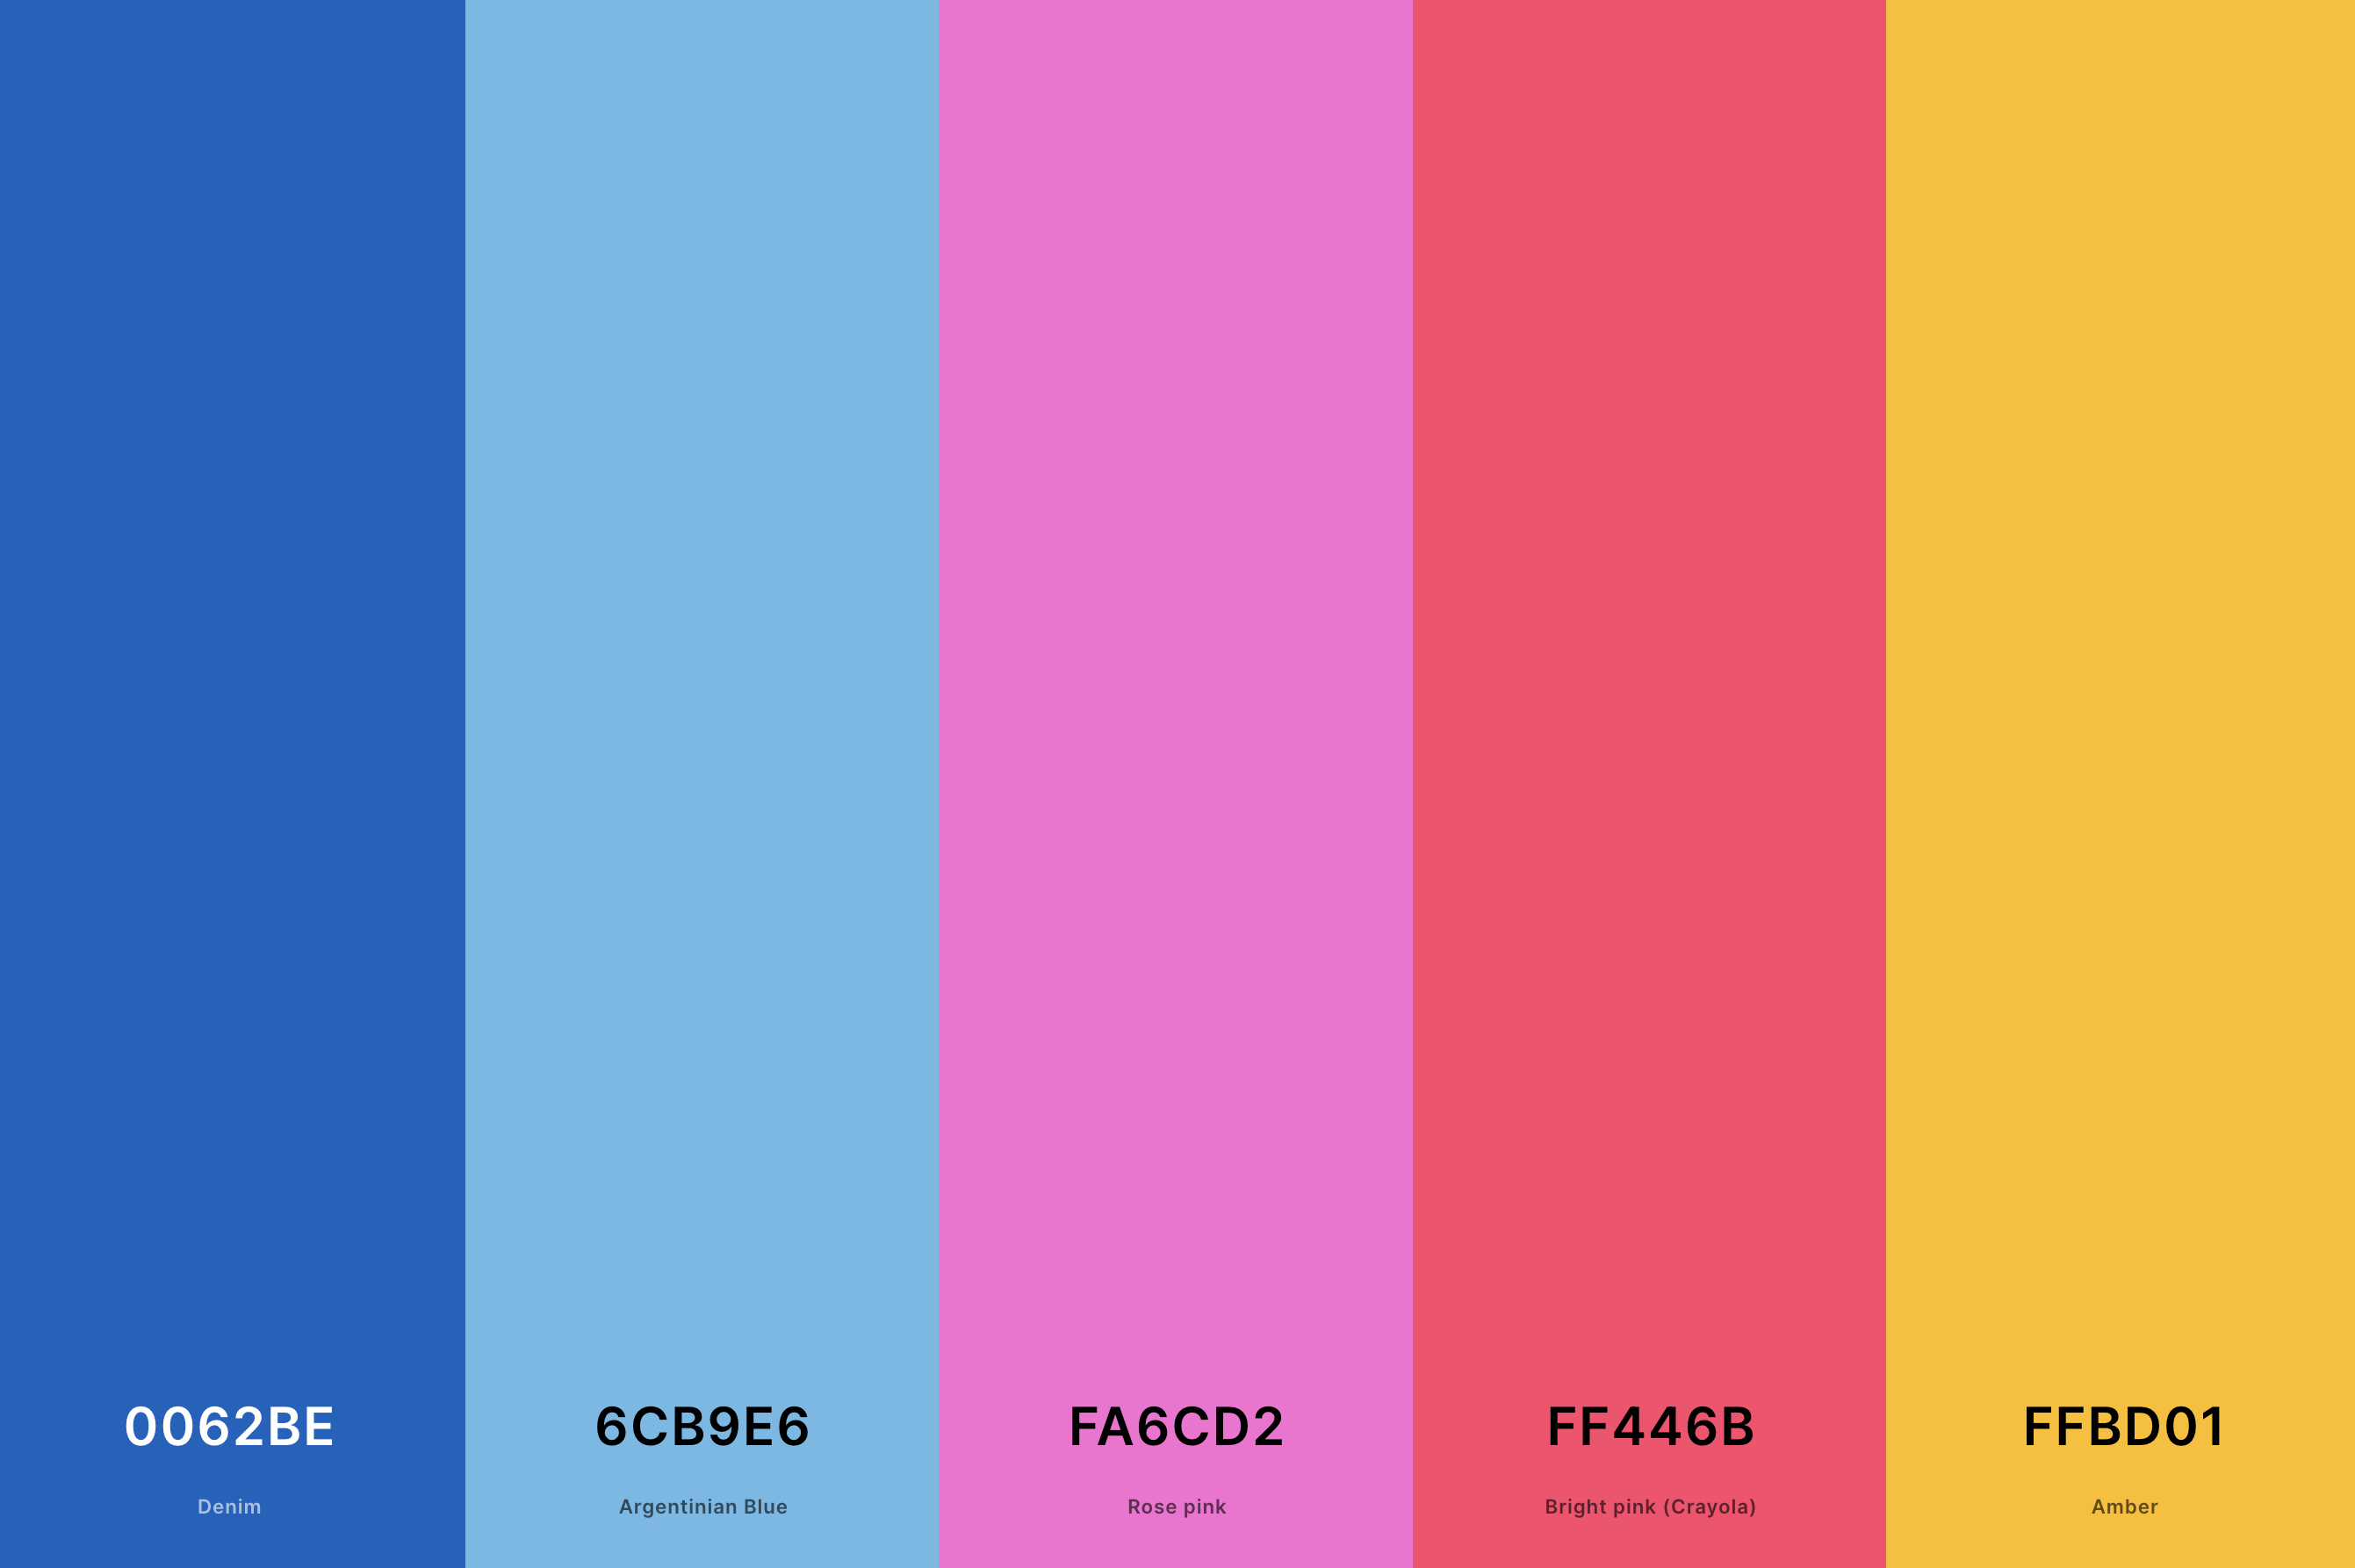 22. Sunset Summer Color Palette Color Palette with Denim (Hex #0062BE) + Argentinian Blue (Hex #6CB9E6) + Rose Pink (Hex #FA6CD2) + Bright Pink (Crayola) (Hex #FF446B) + Amber (Hex #FFBD01) Color Palette with Hex Codes